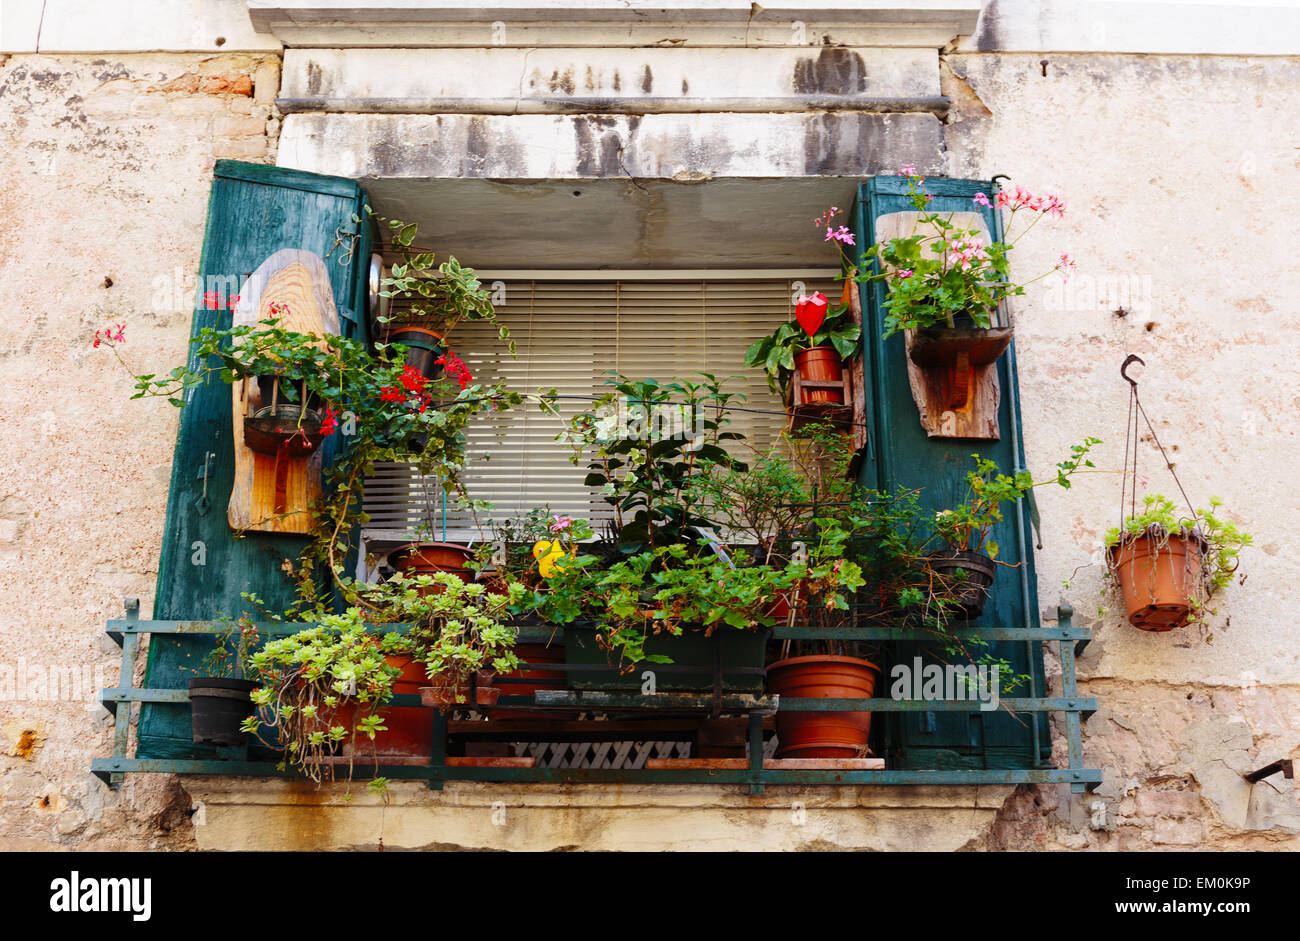 Window in an old house decorated with flower pots and flowers Stock Photo